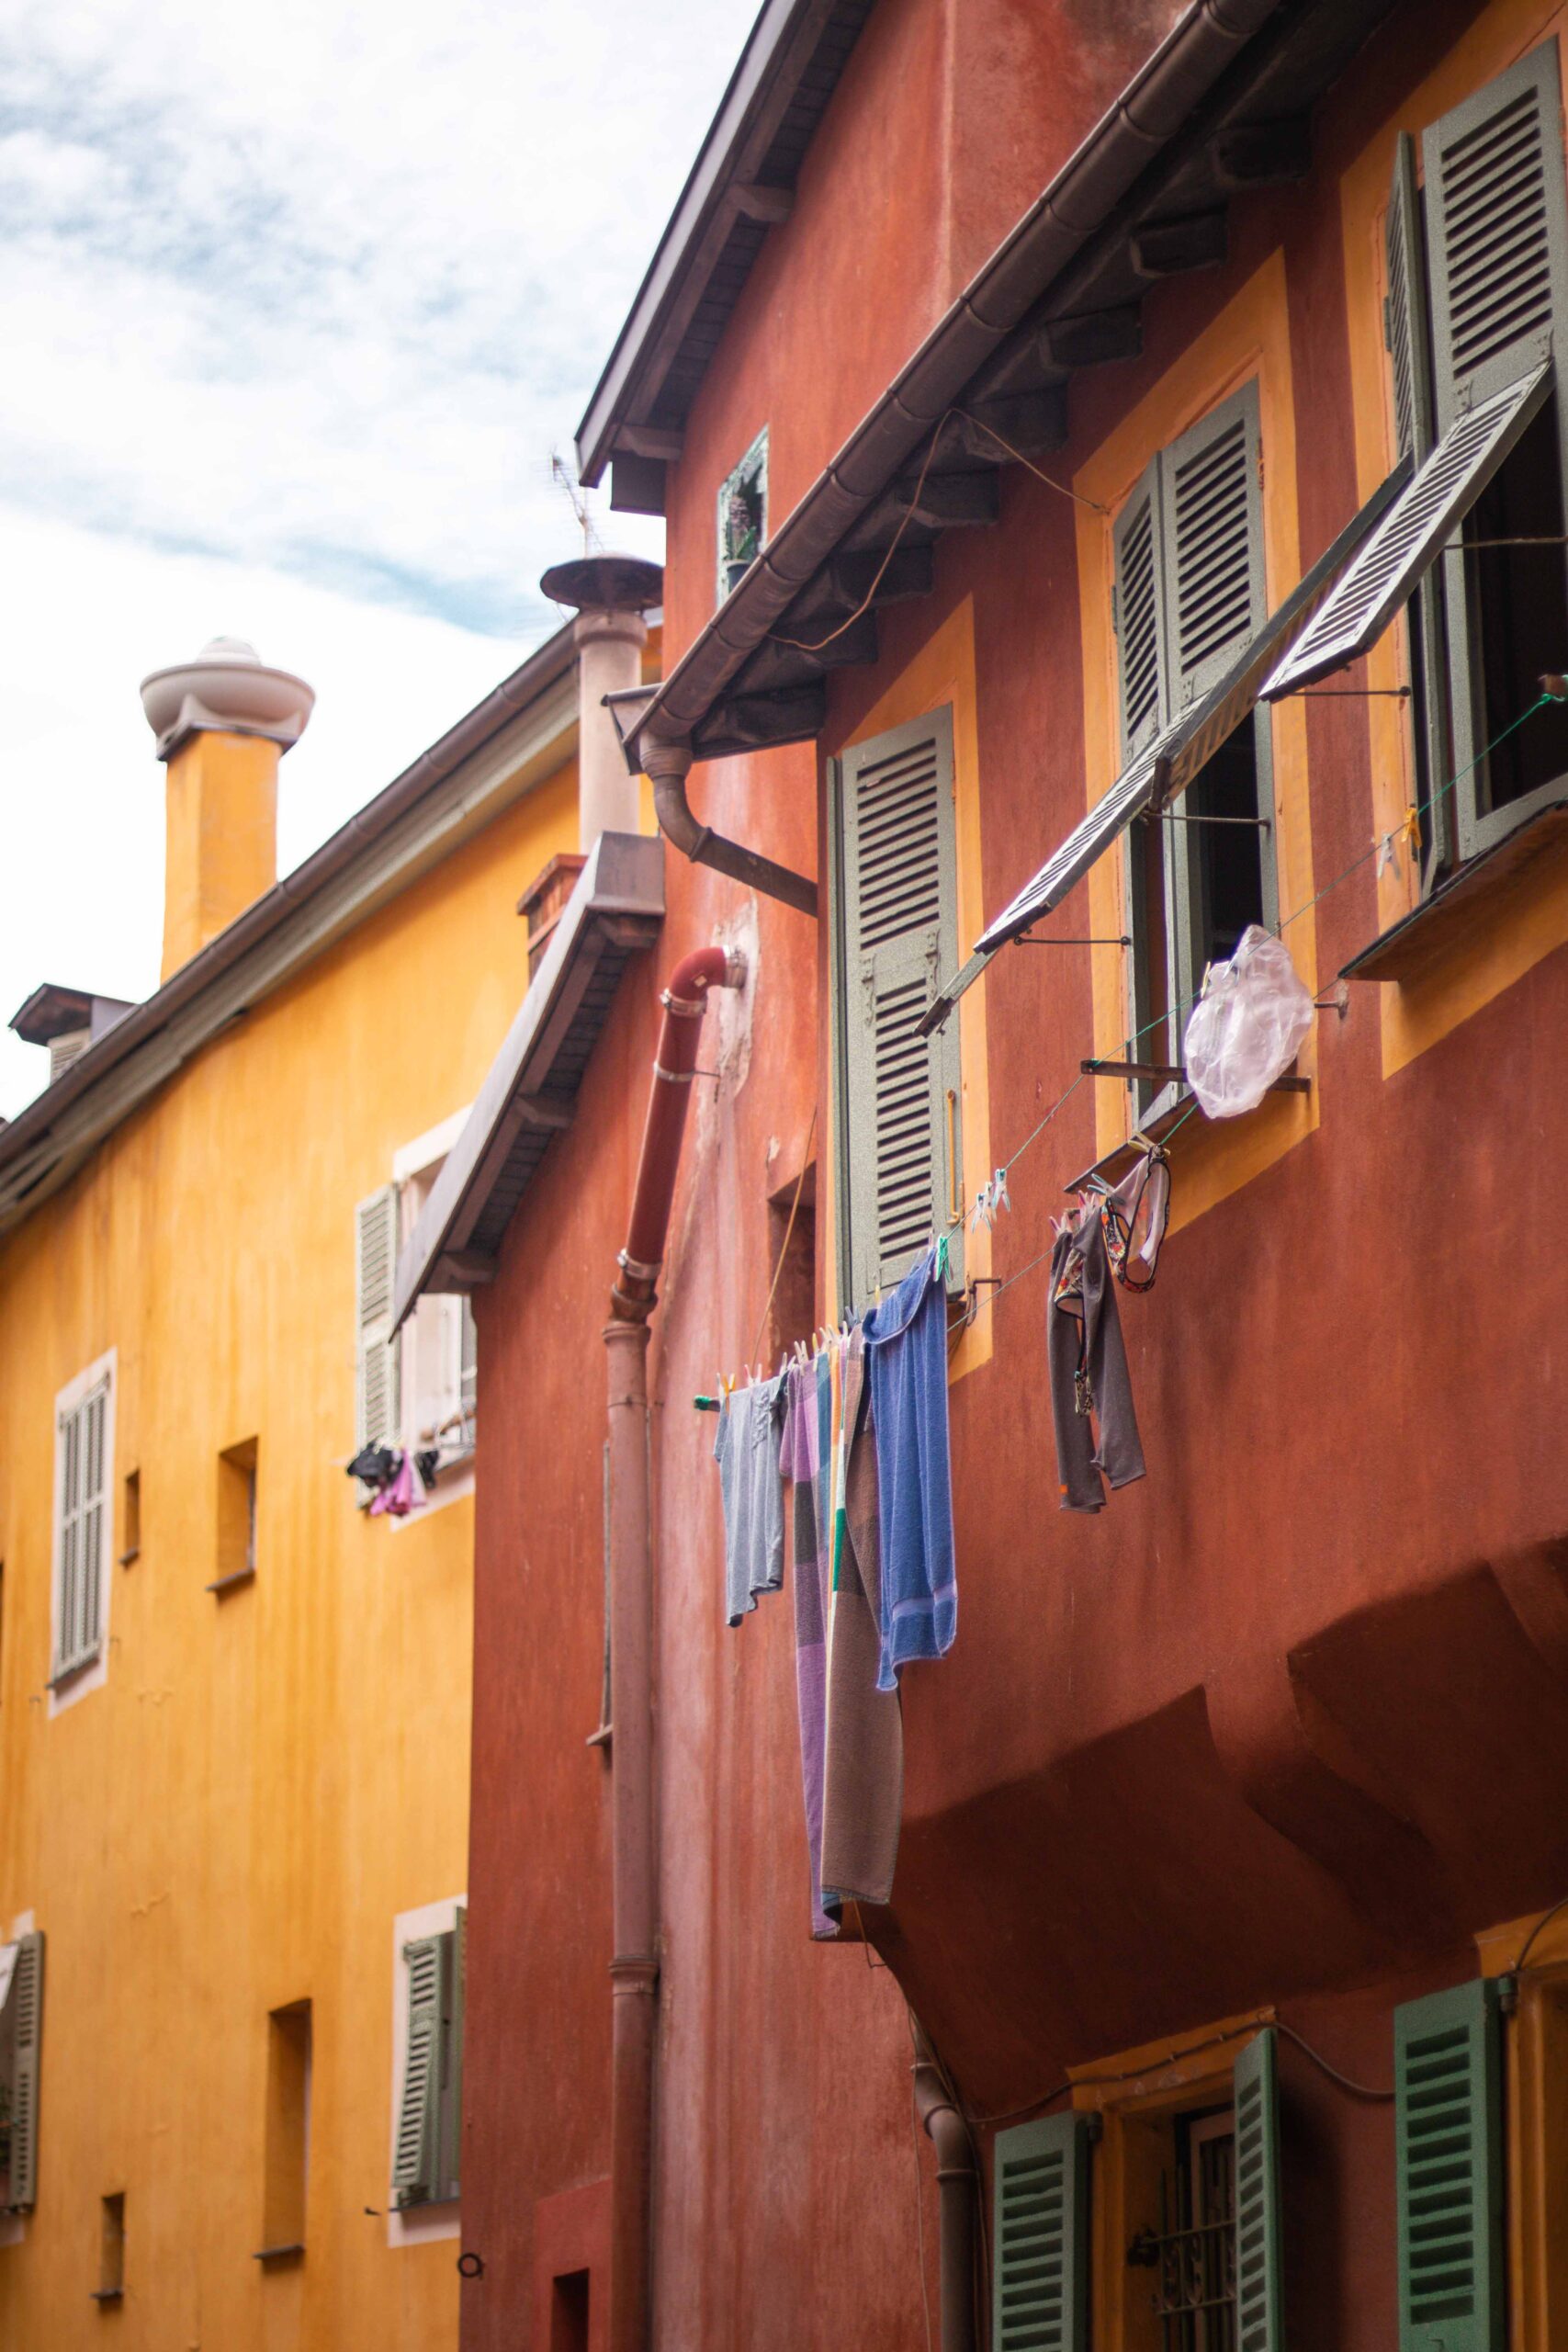 Hanging clothes drying on the balcony of colourful buildings with red and orange facades in the Old Town of Nice (Vieux-Nice) in Nice, France